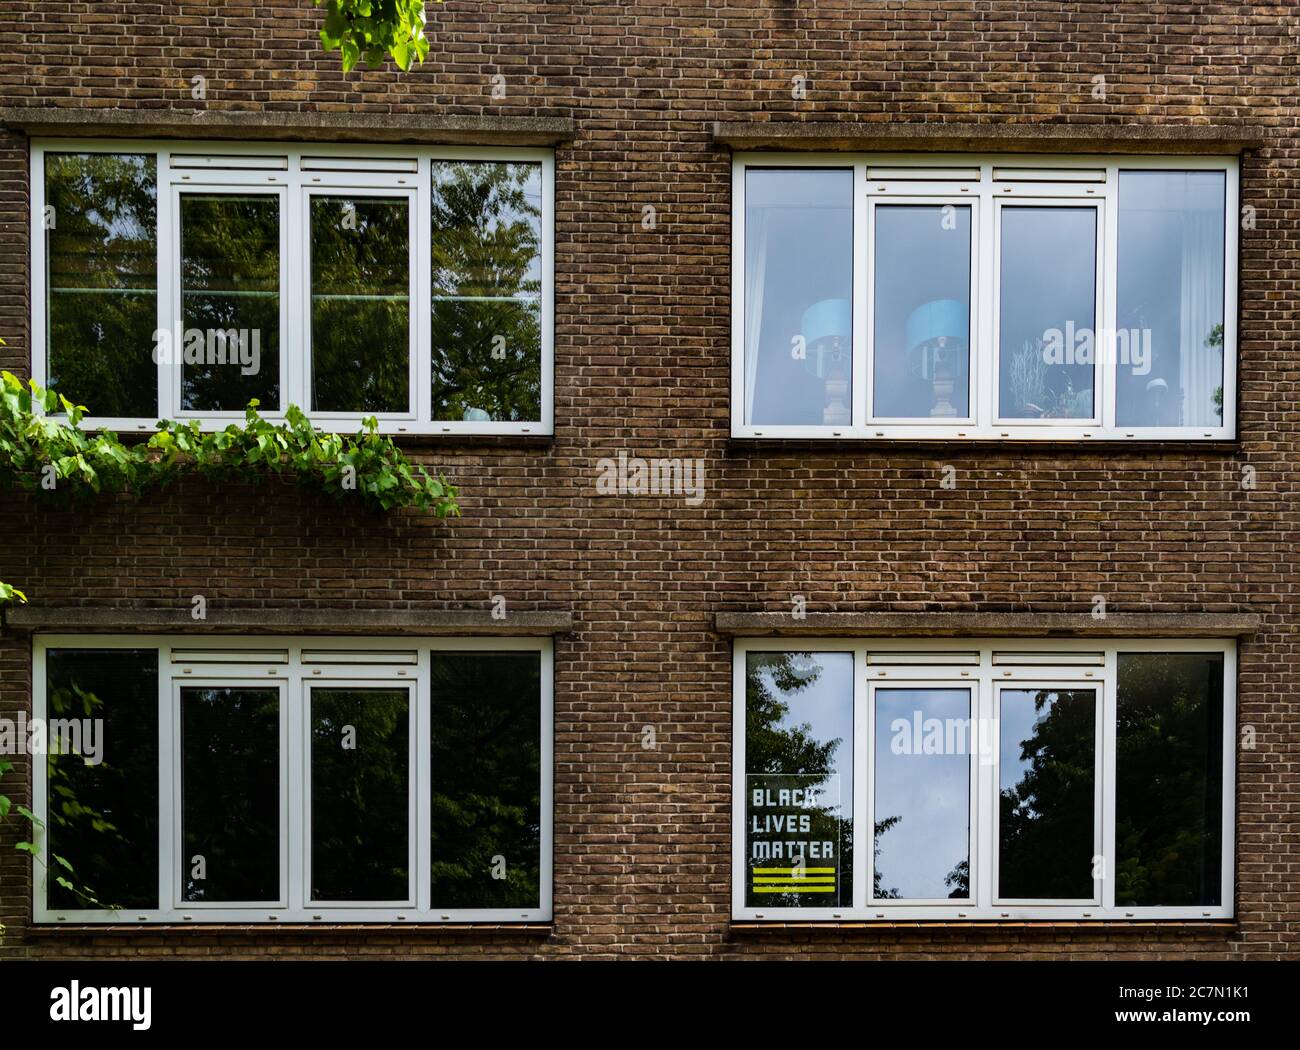 AMSTERDAM, THE NETHERLANDS JULY 1, 2020: Black lives matter poster in a apartment window Stock Photo